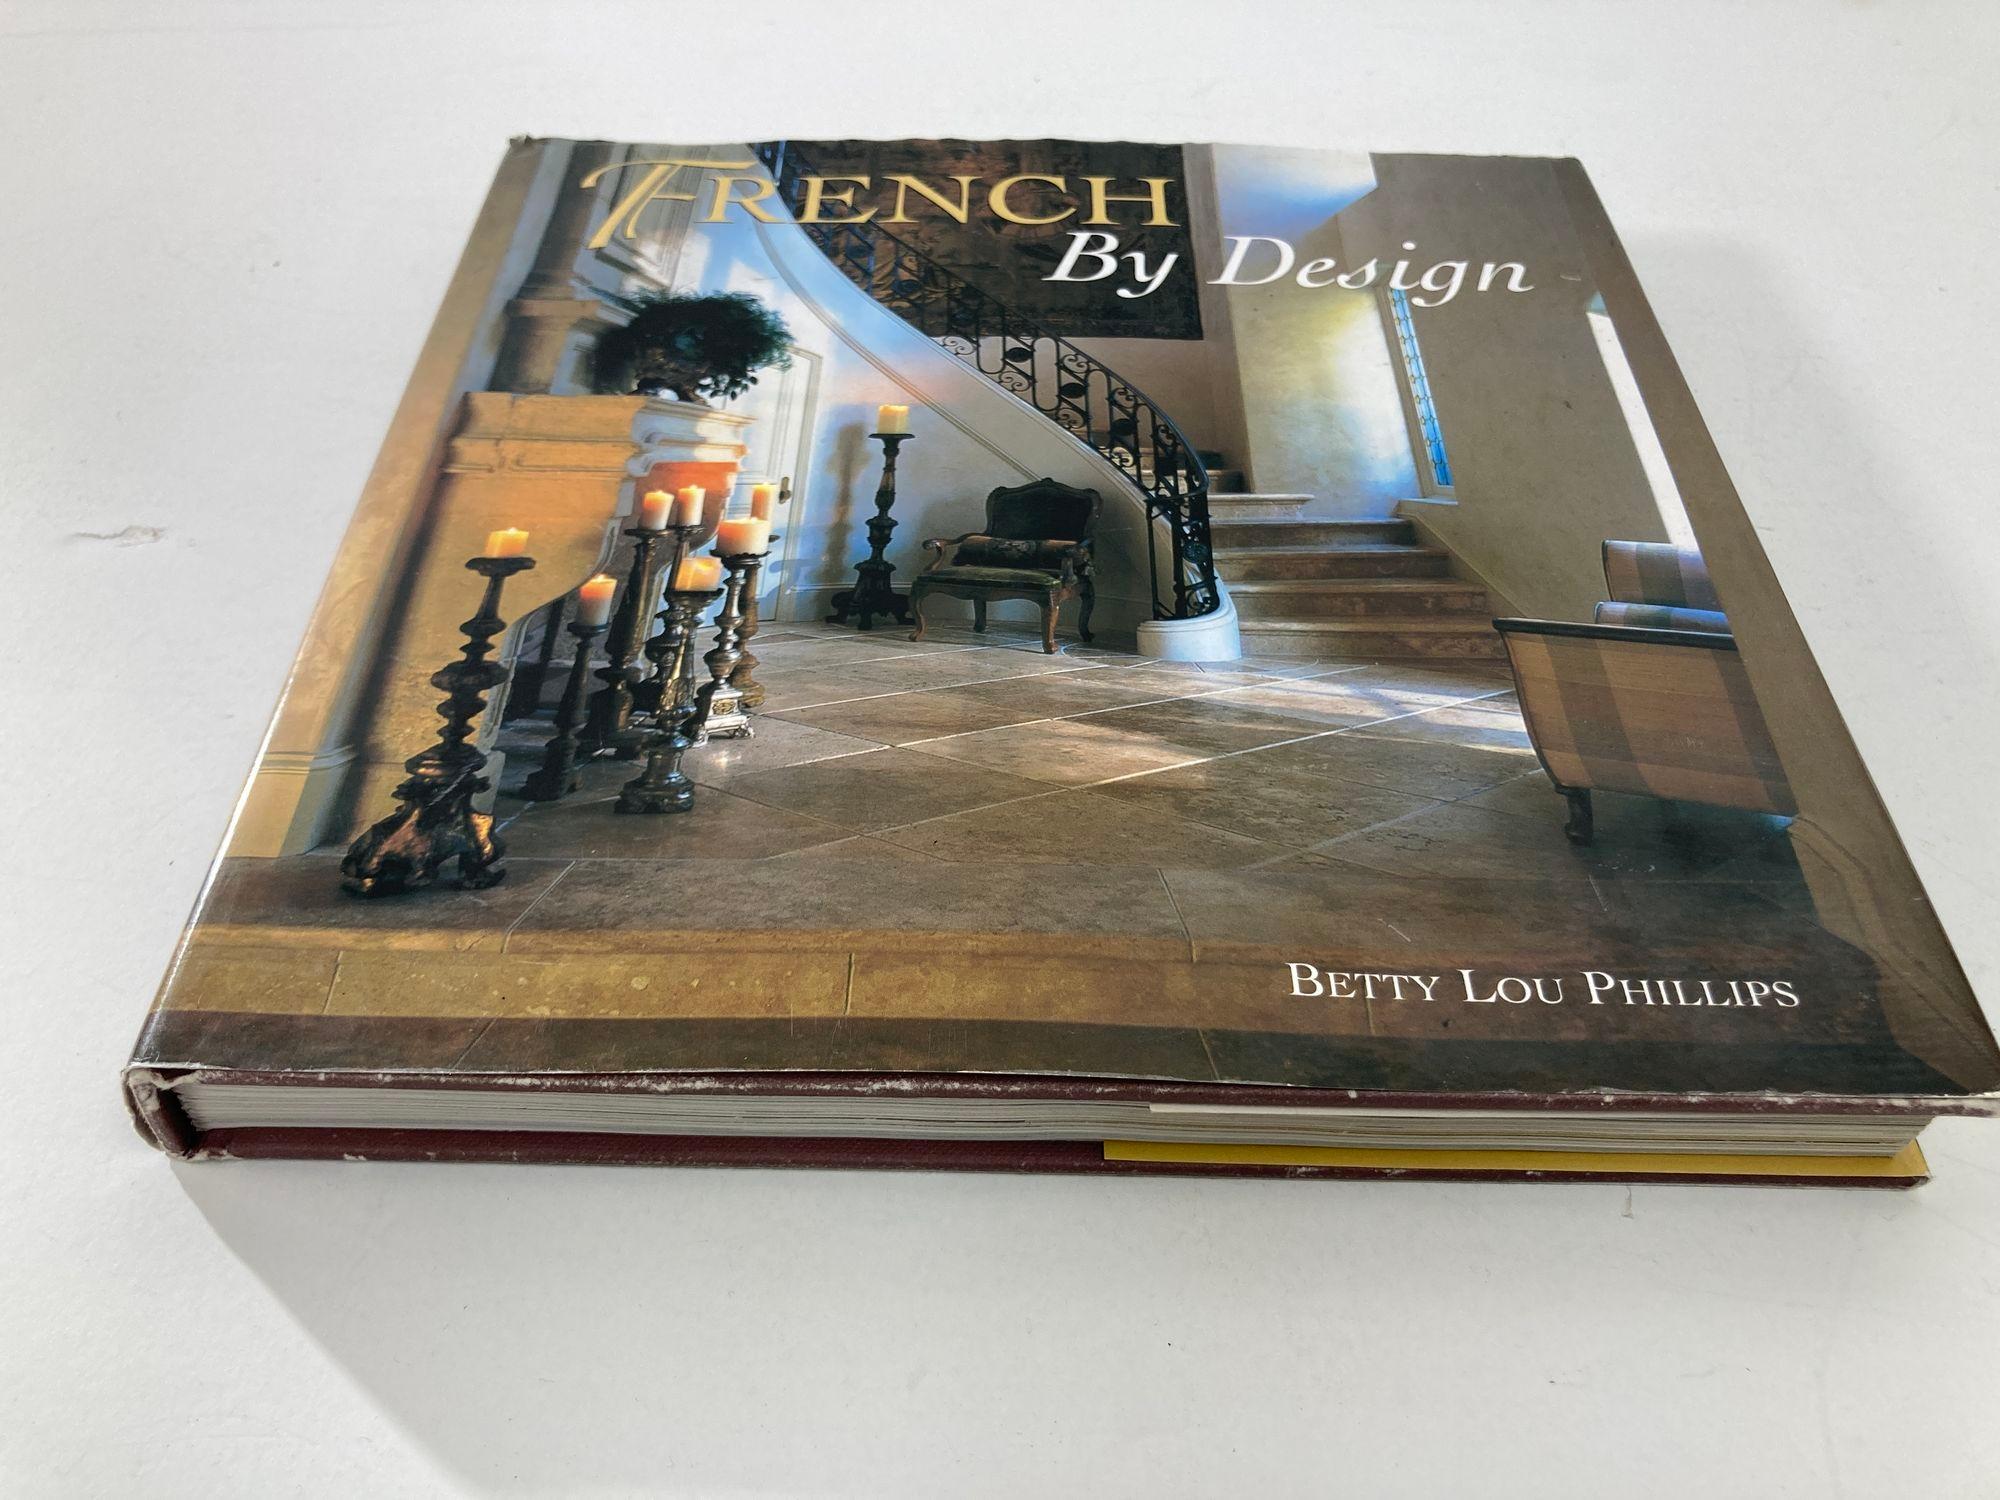 French by Design by Betty Lou Phillips Hardcover Book.Signed